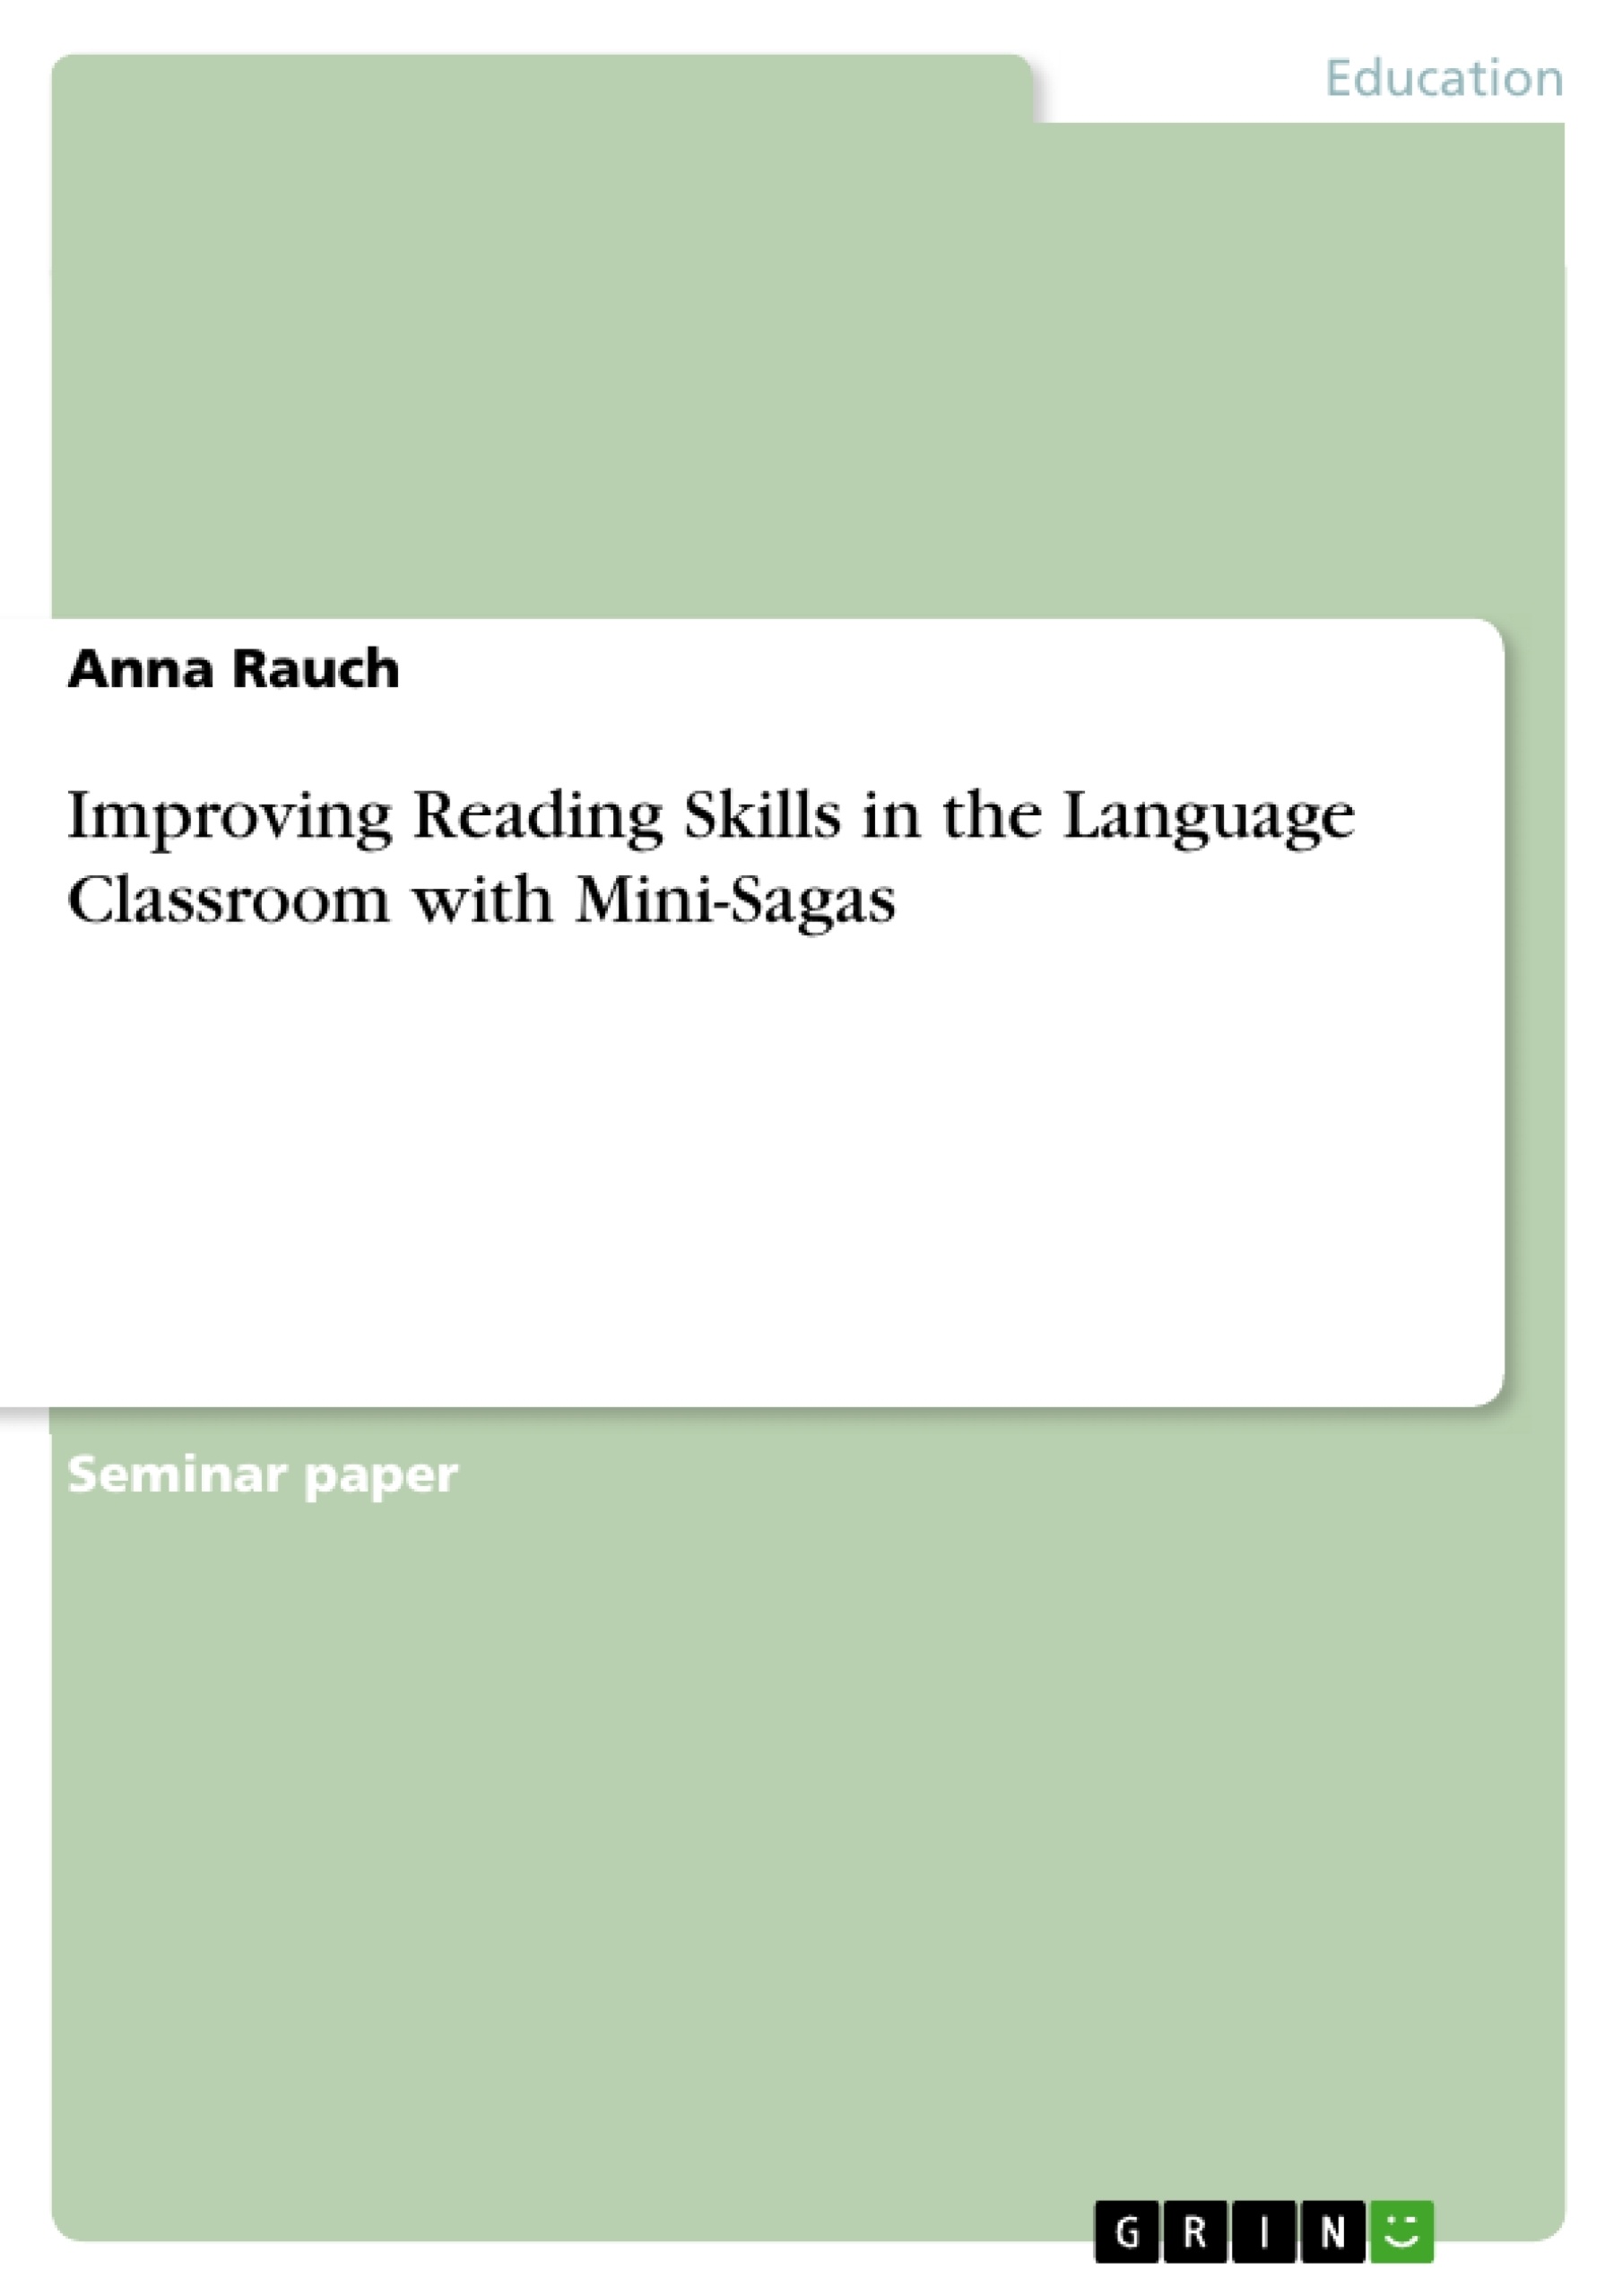 Title: Improving Reading Skills in the Language Classroom with Mini-Sagas